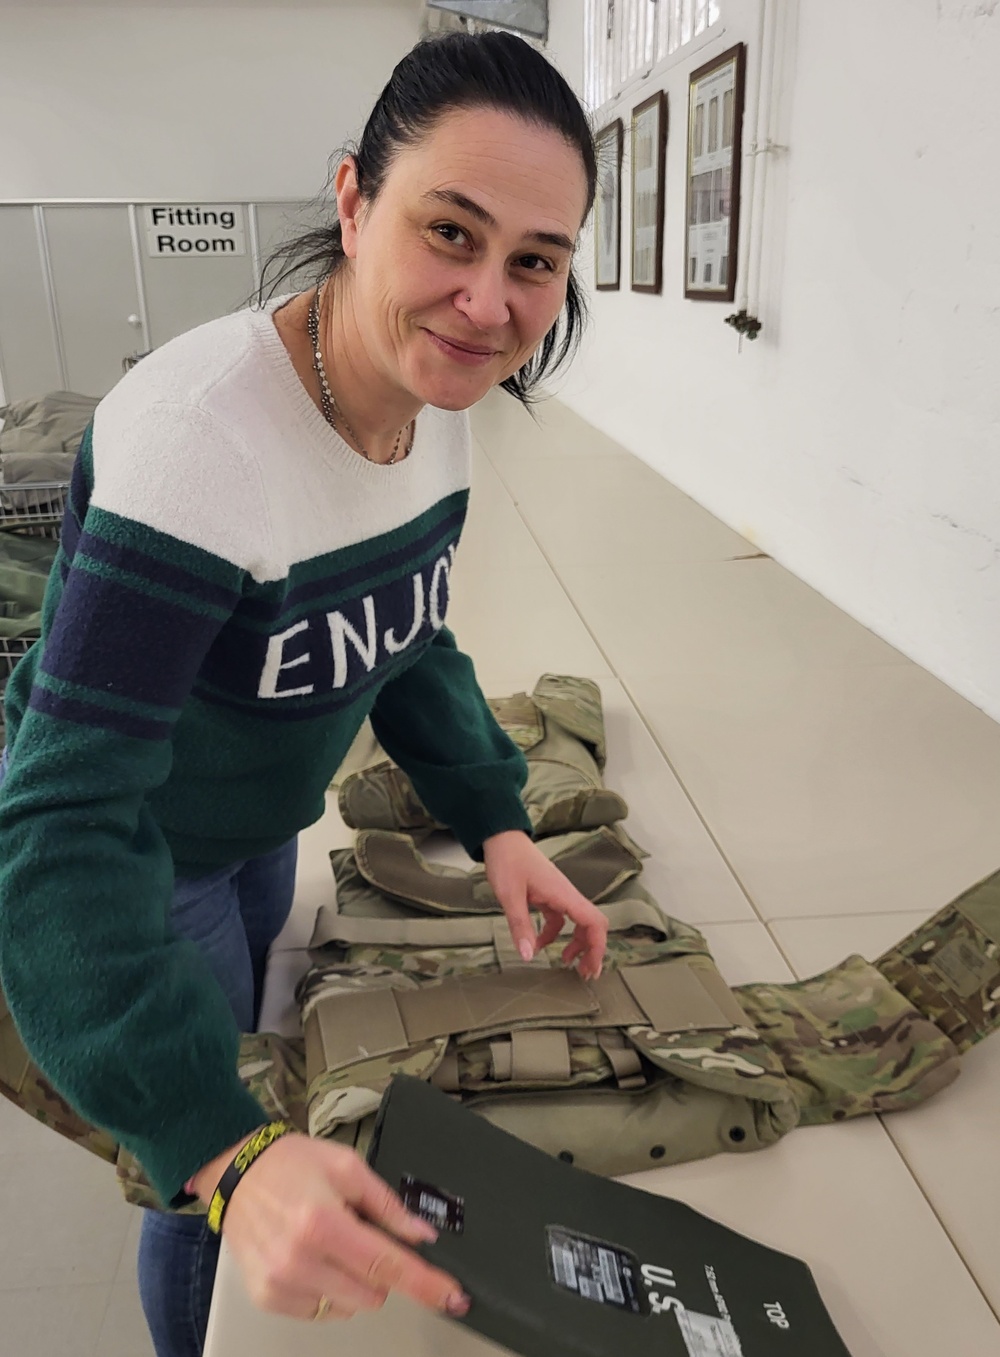 From growing up in Croatia to working in Germany for the U.S. Army, CIF tech has story to tell